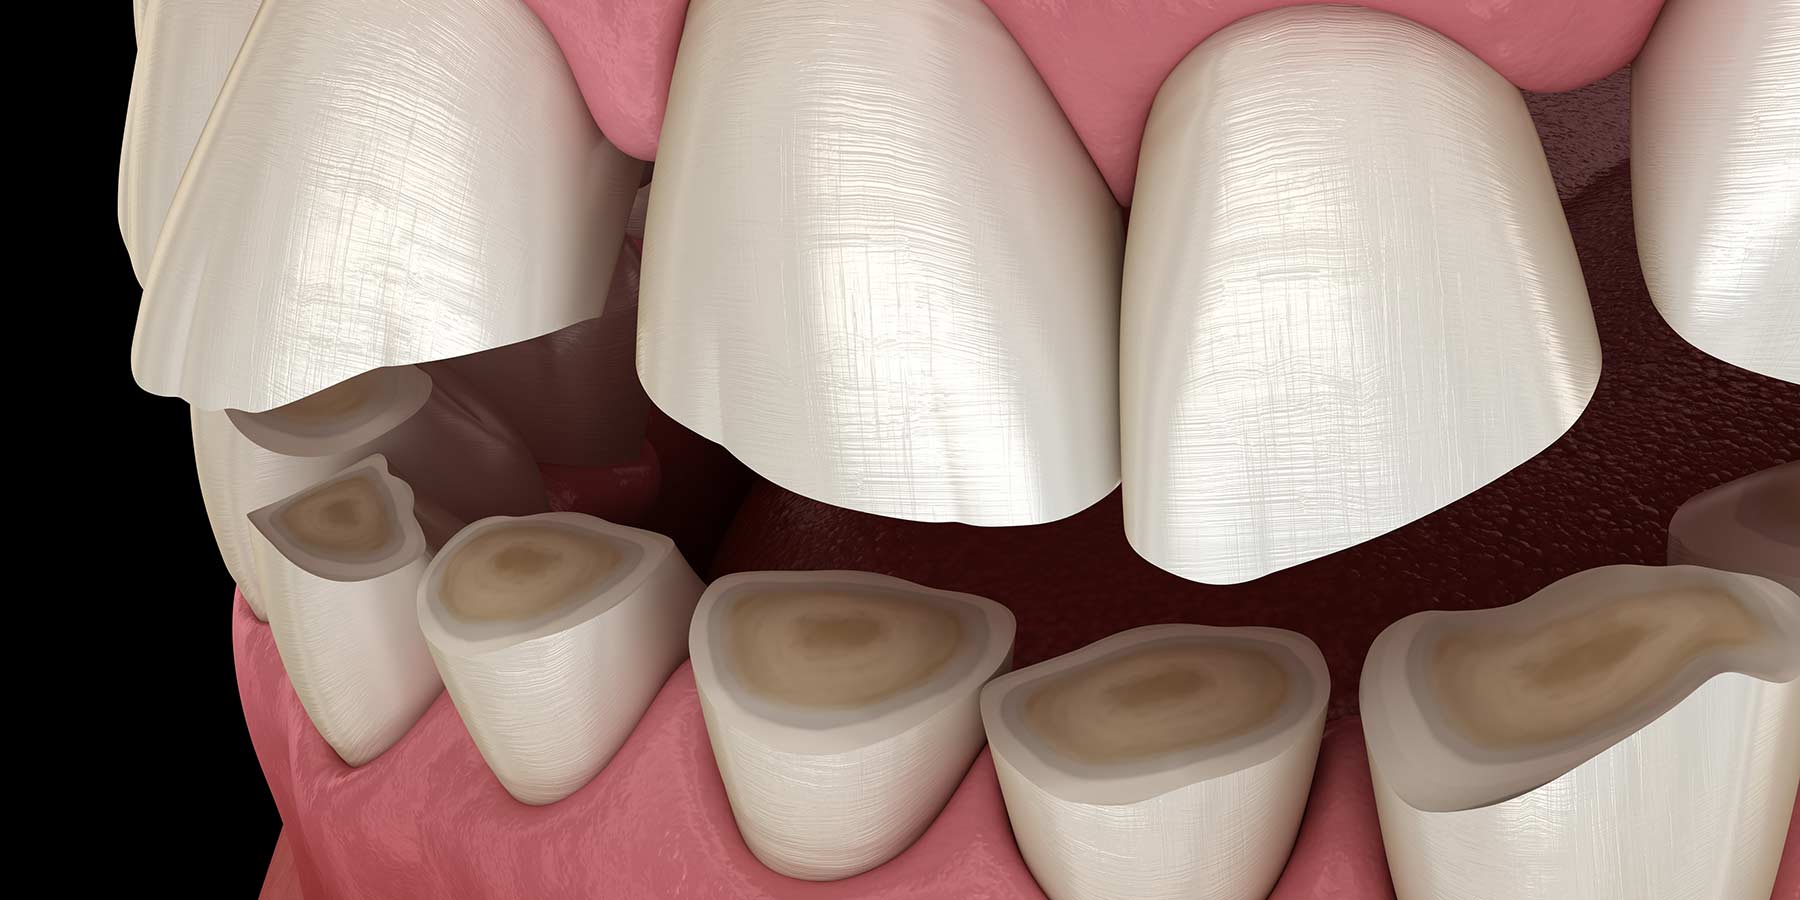 Teeth Grinding: The Signs and Symptoms of Bruxism for Adults